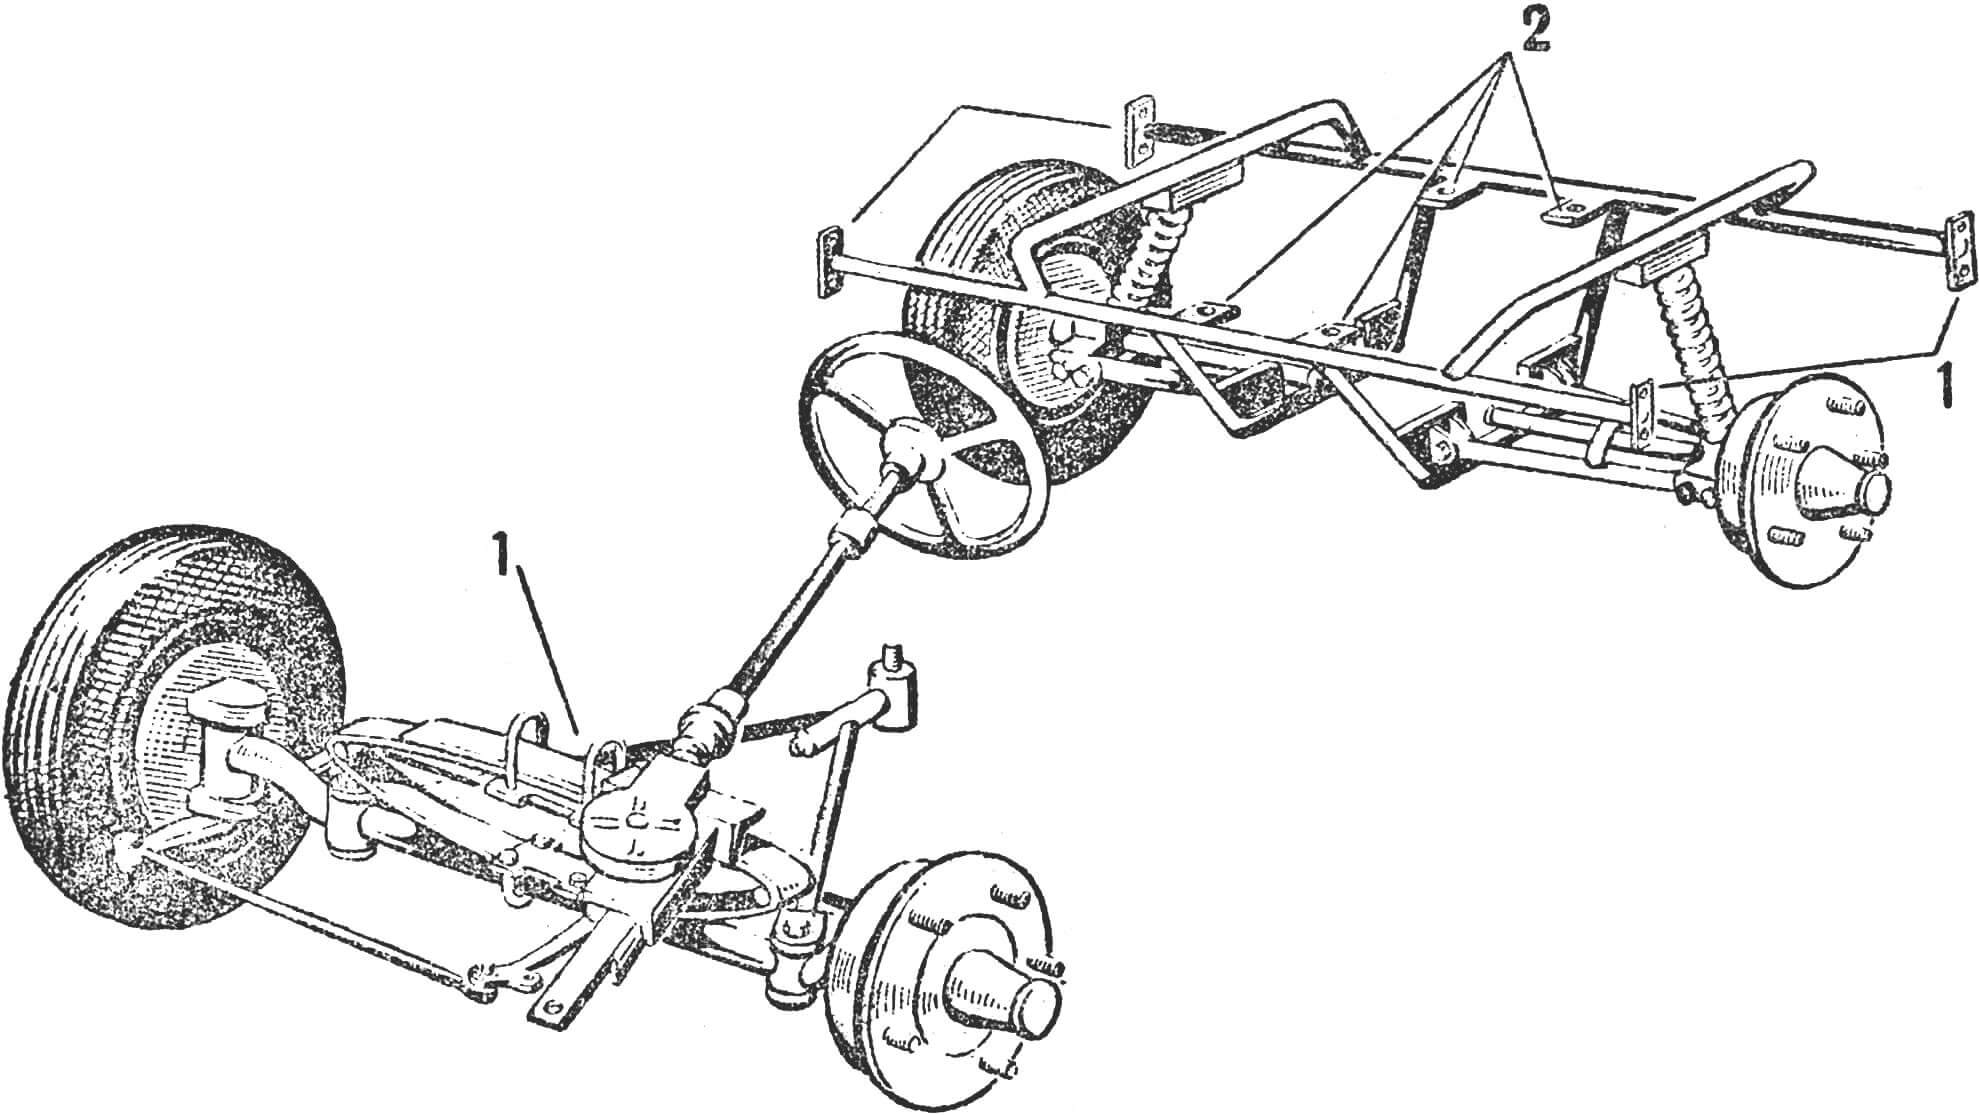 FIG. 2. VEHICLE UNDERCARRIAGE